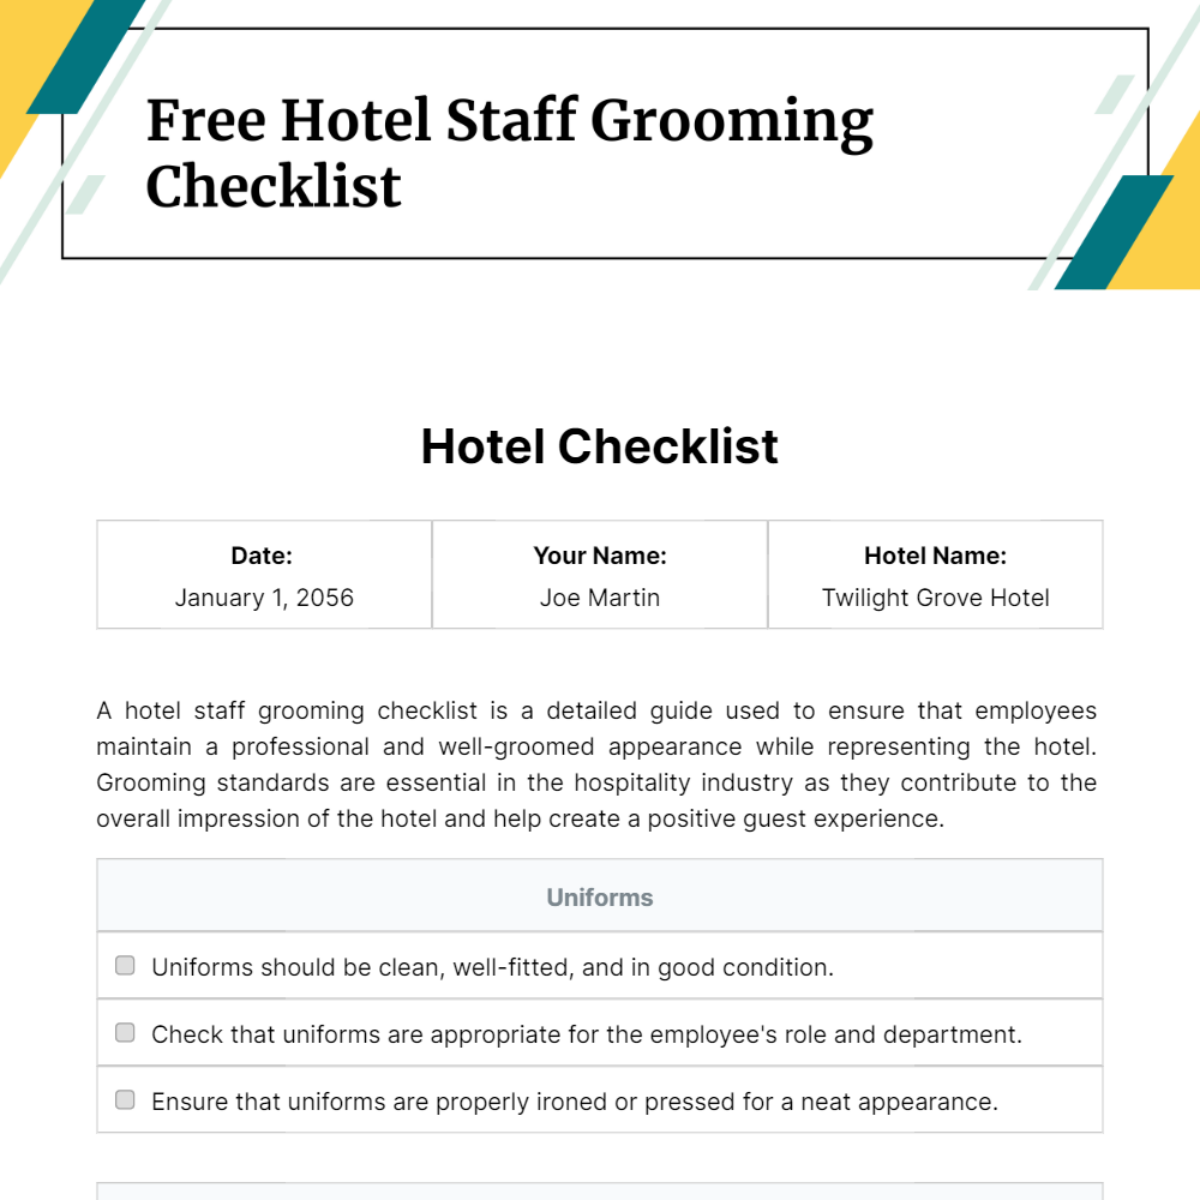 Free Hotel Staff Grooming Checklist Template